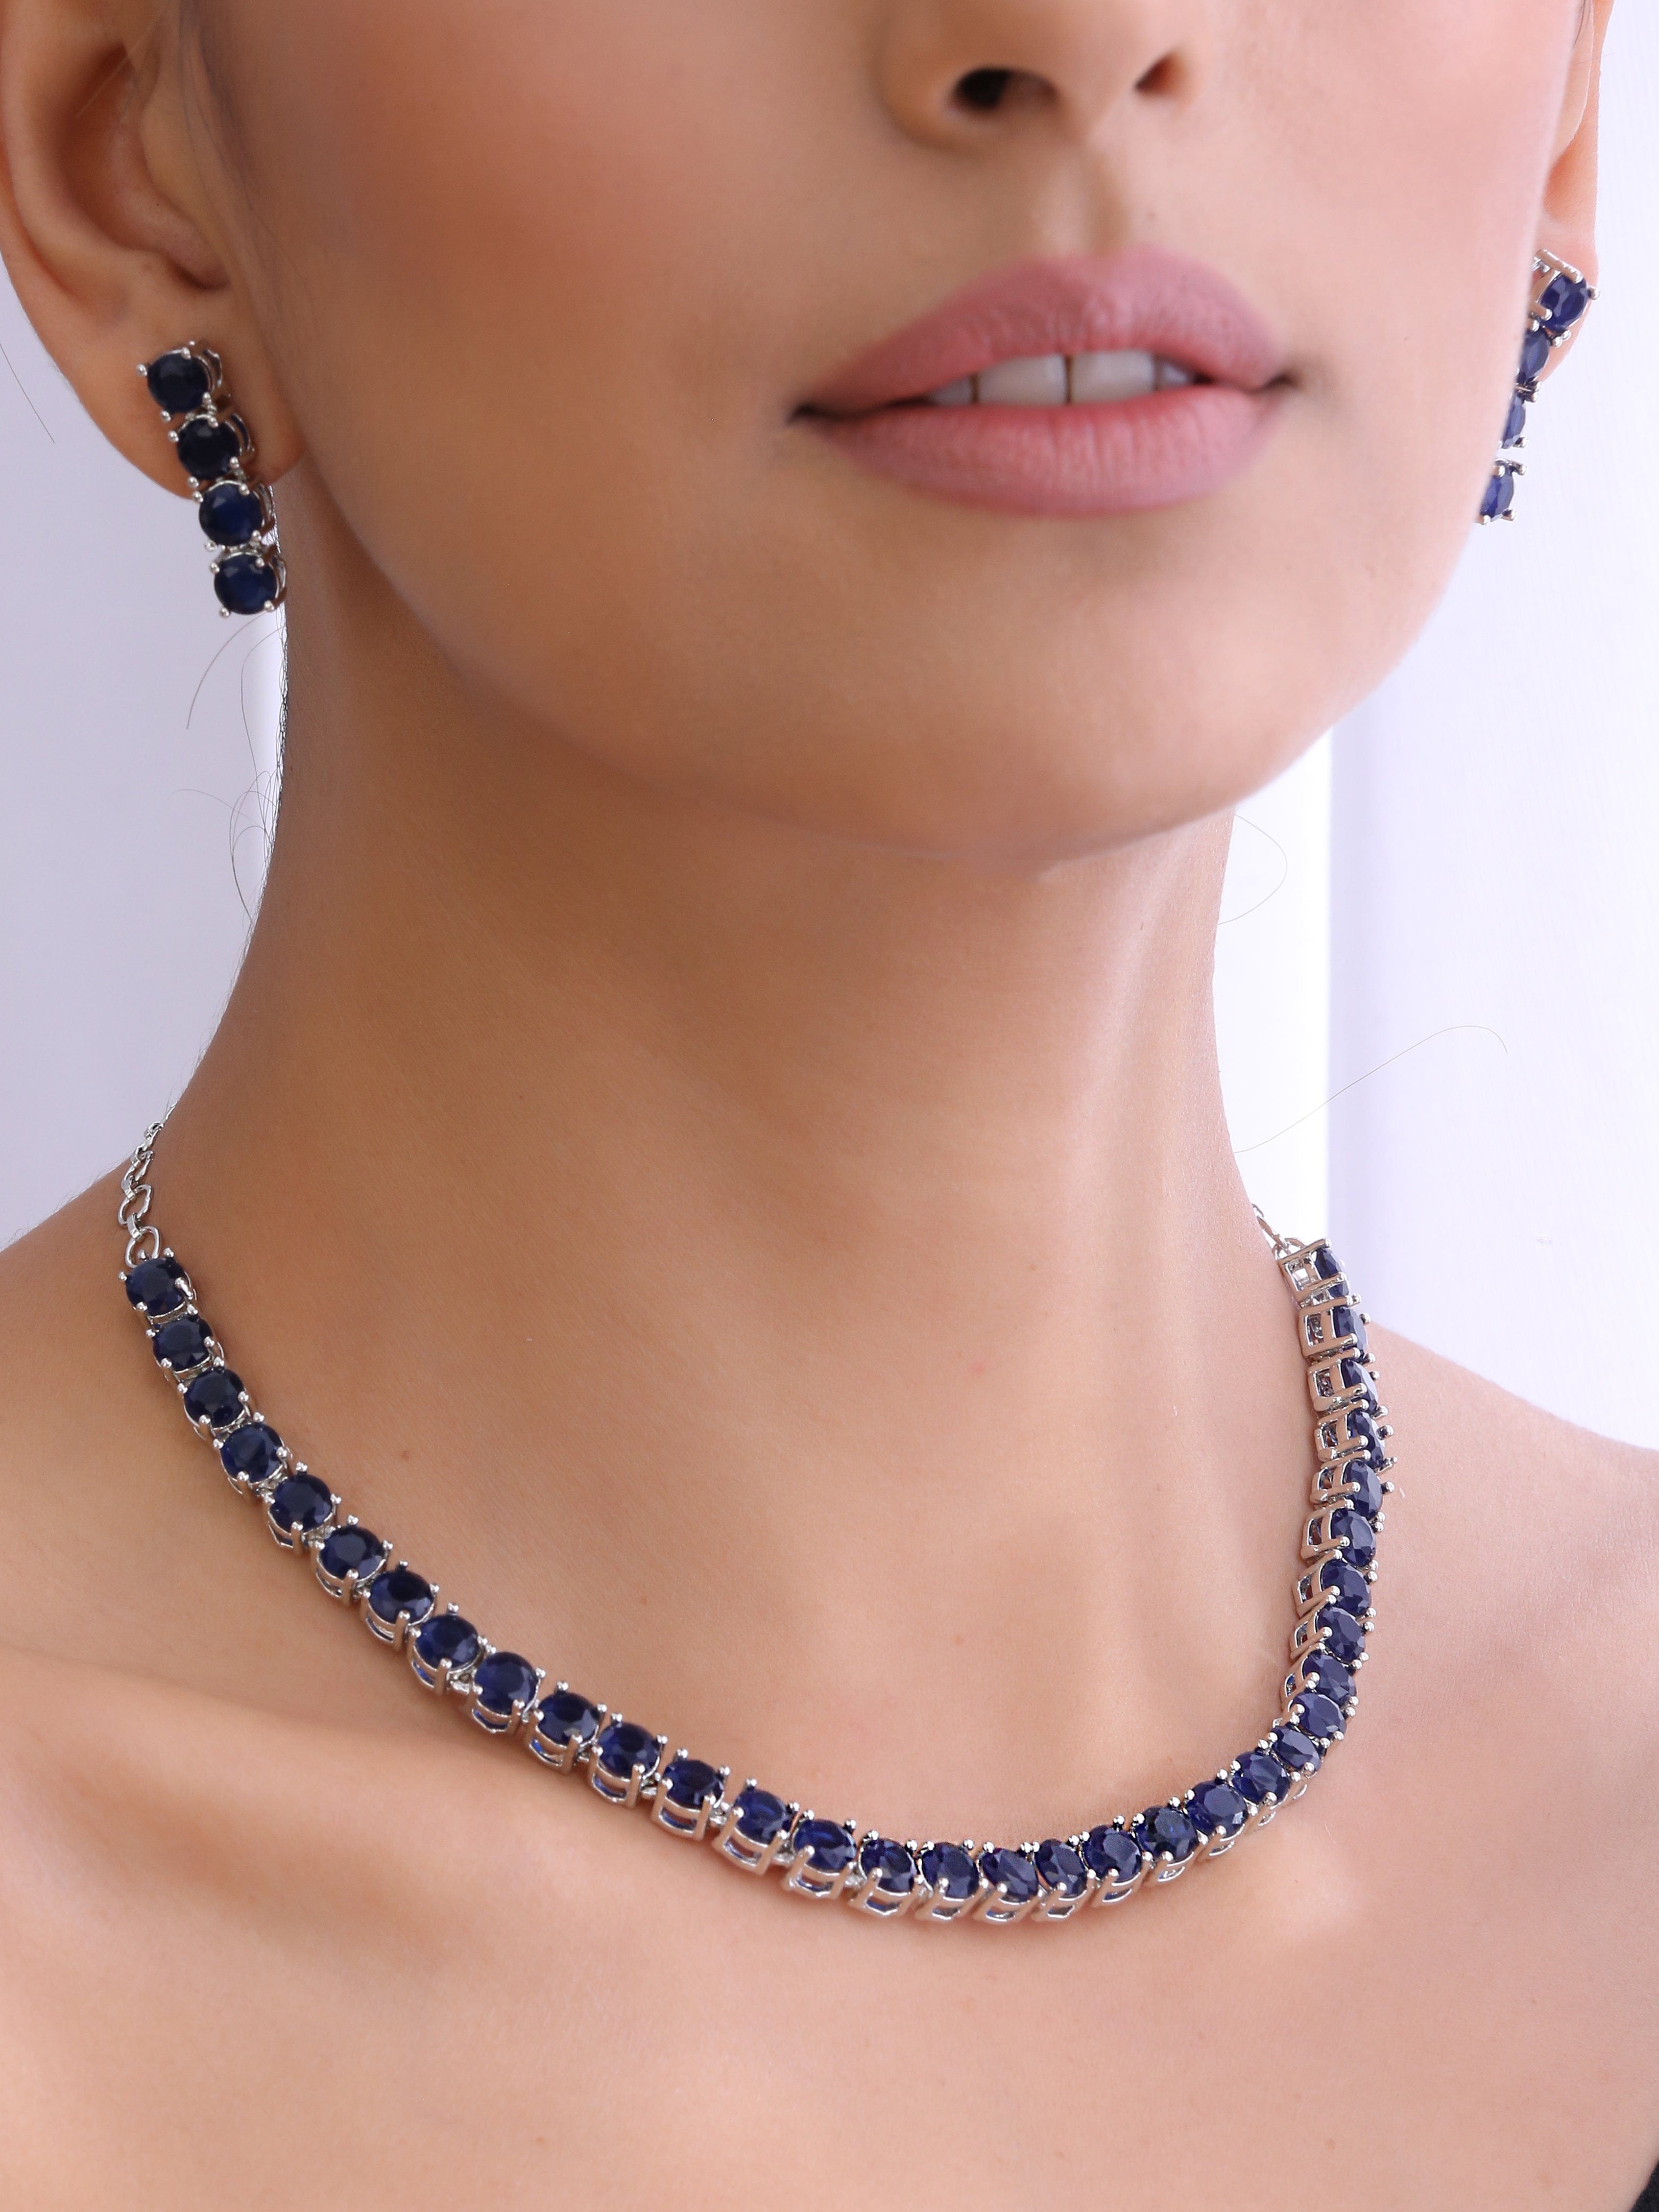 Buy Sapphire Blue Bridal Jewelry Set Crystal Wedding Necklace Online in  India  Etsy